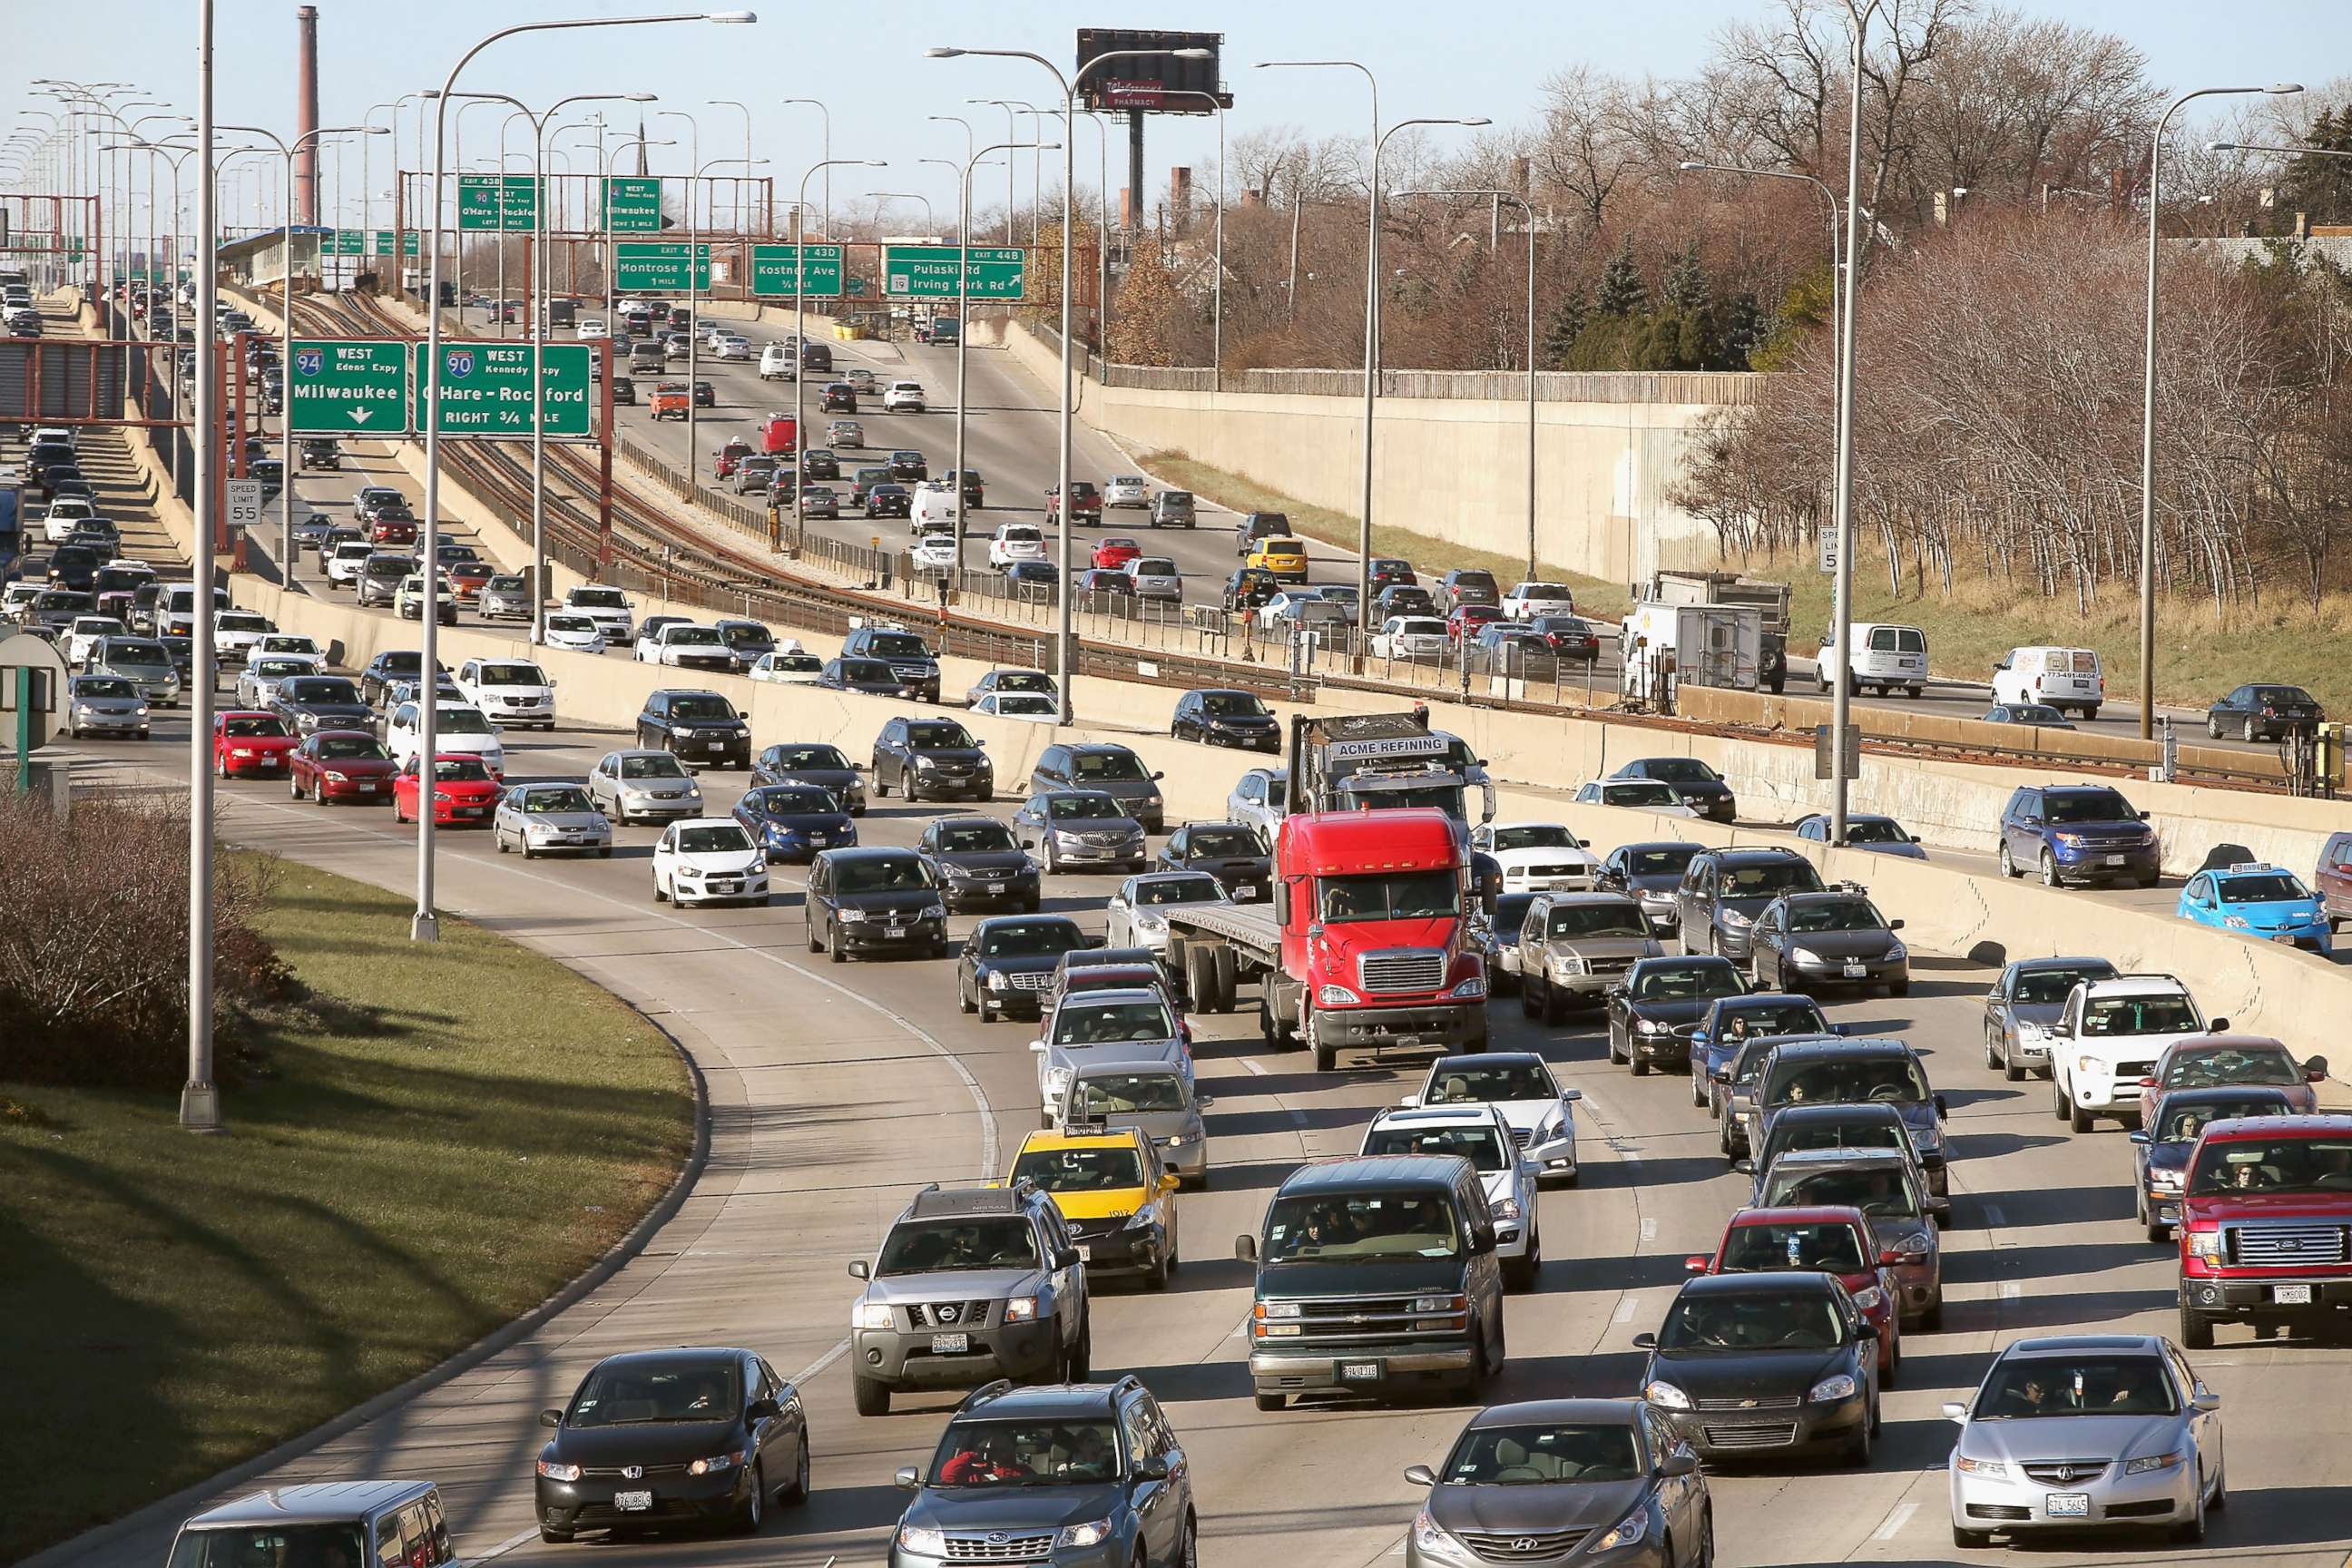 PHOTO: In this file photo, traffic backs up on the Kennedy Expressway as commuters and holiday travelers try to get an early start on their Thanksgiving travel, Nov. 27, 2013, in Chicago.